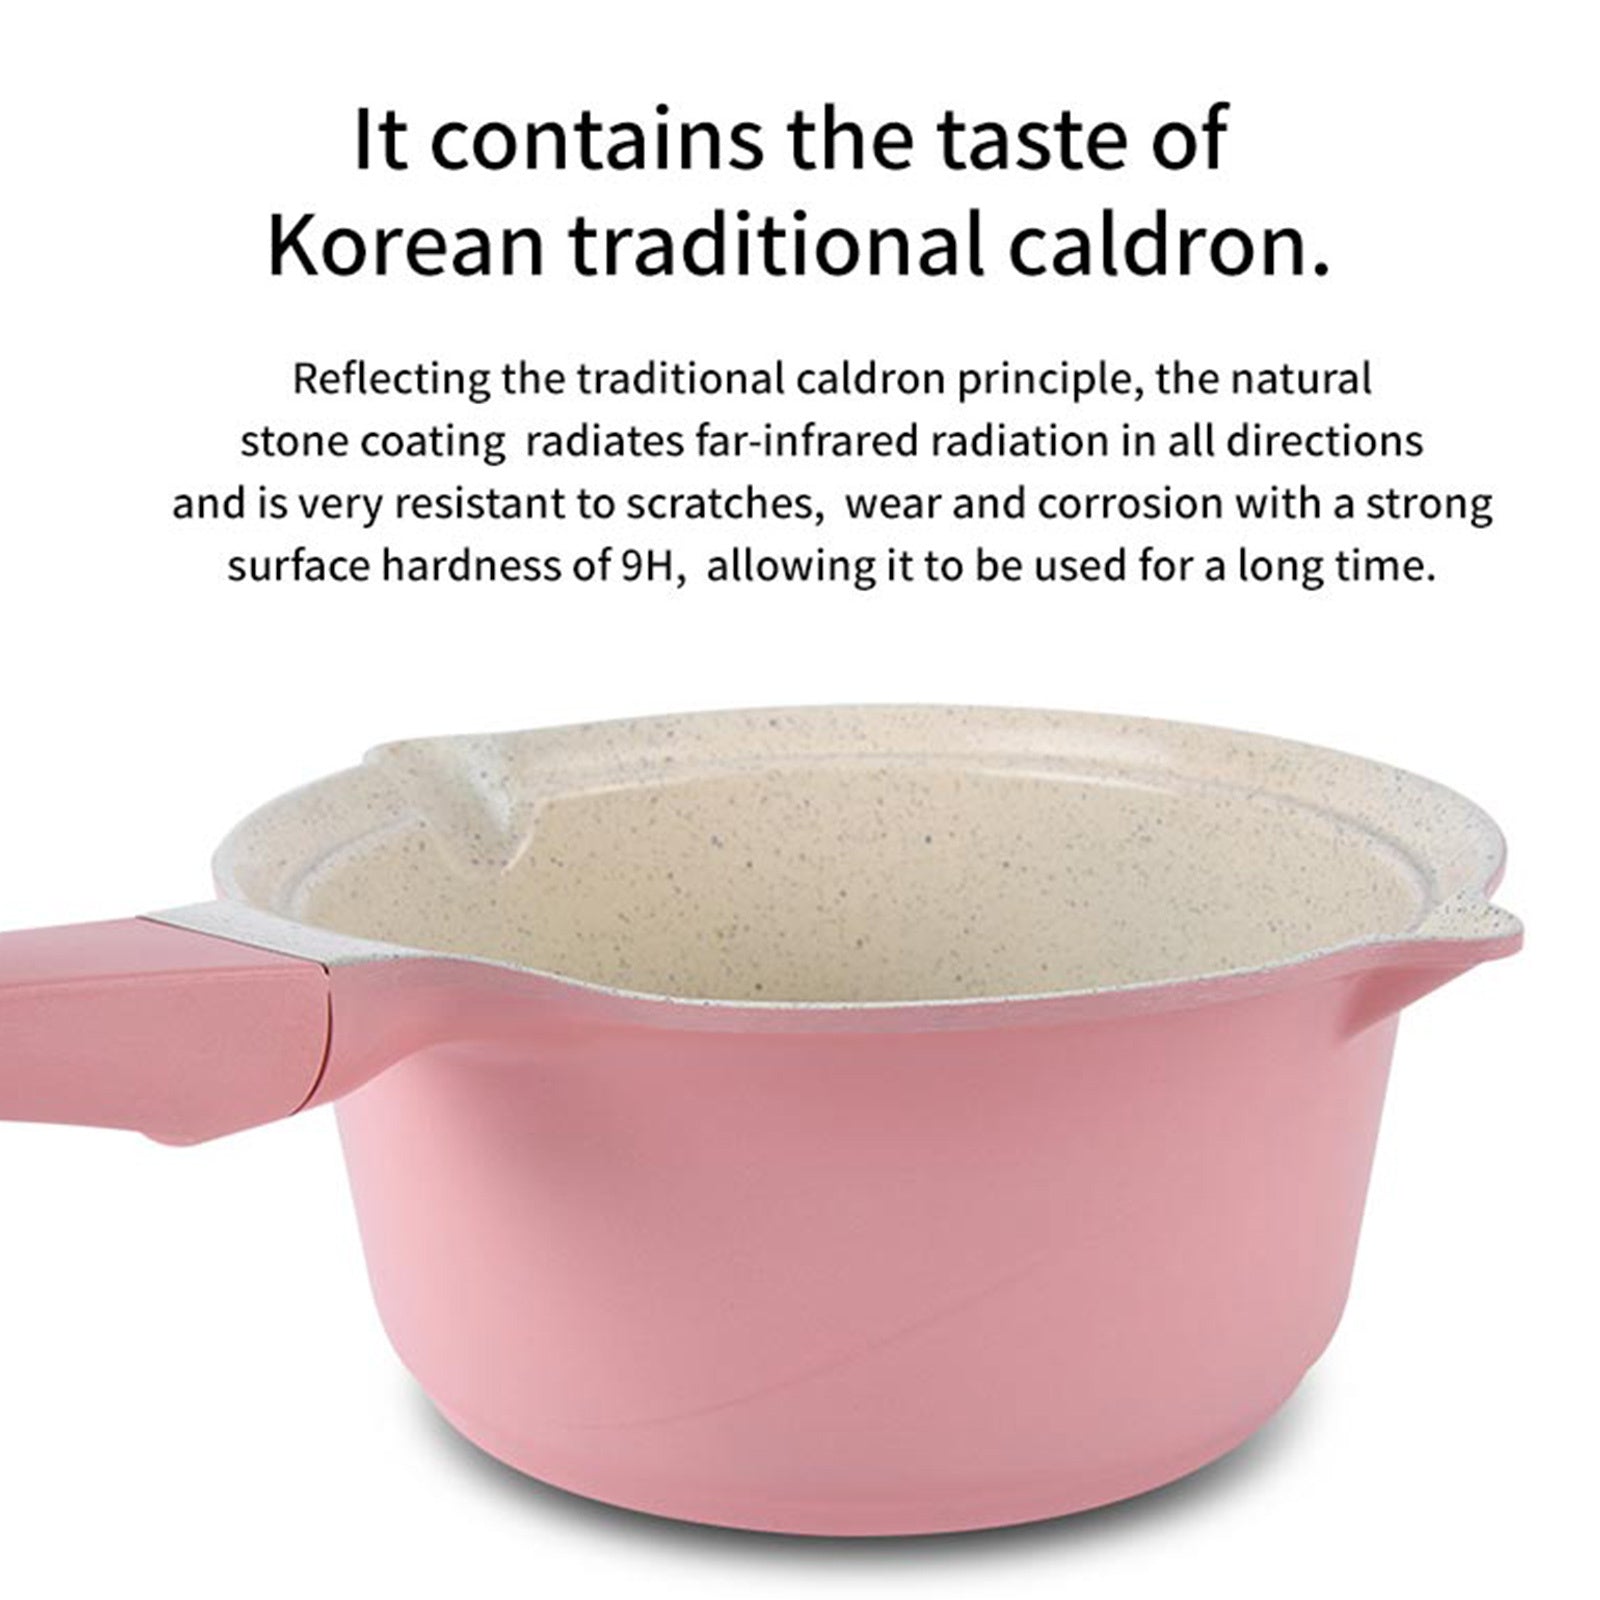 Happy Lambs 16cm Pink Sauce Pot Frying Pan w/ a Lid Set Non-Stick Stone Induction IH Frypan